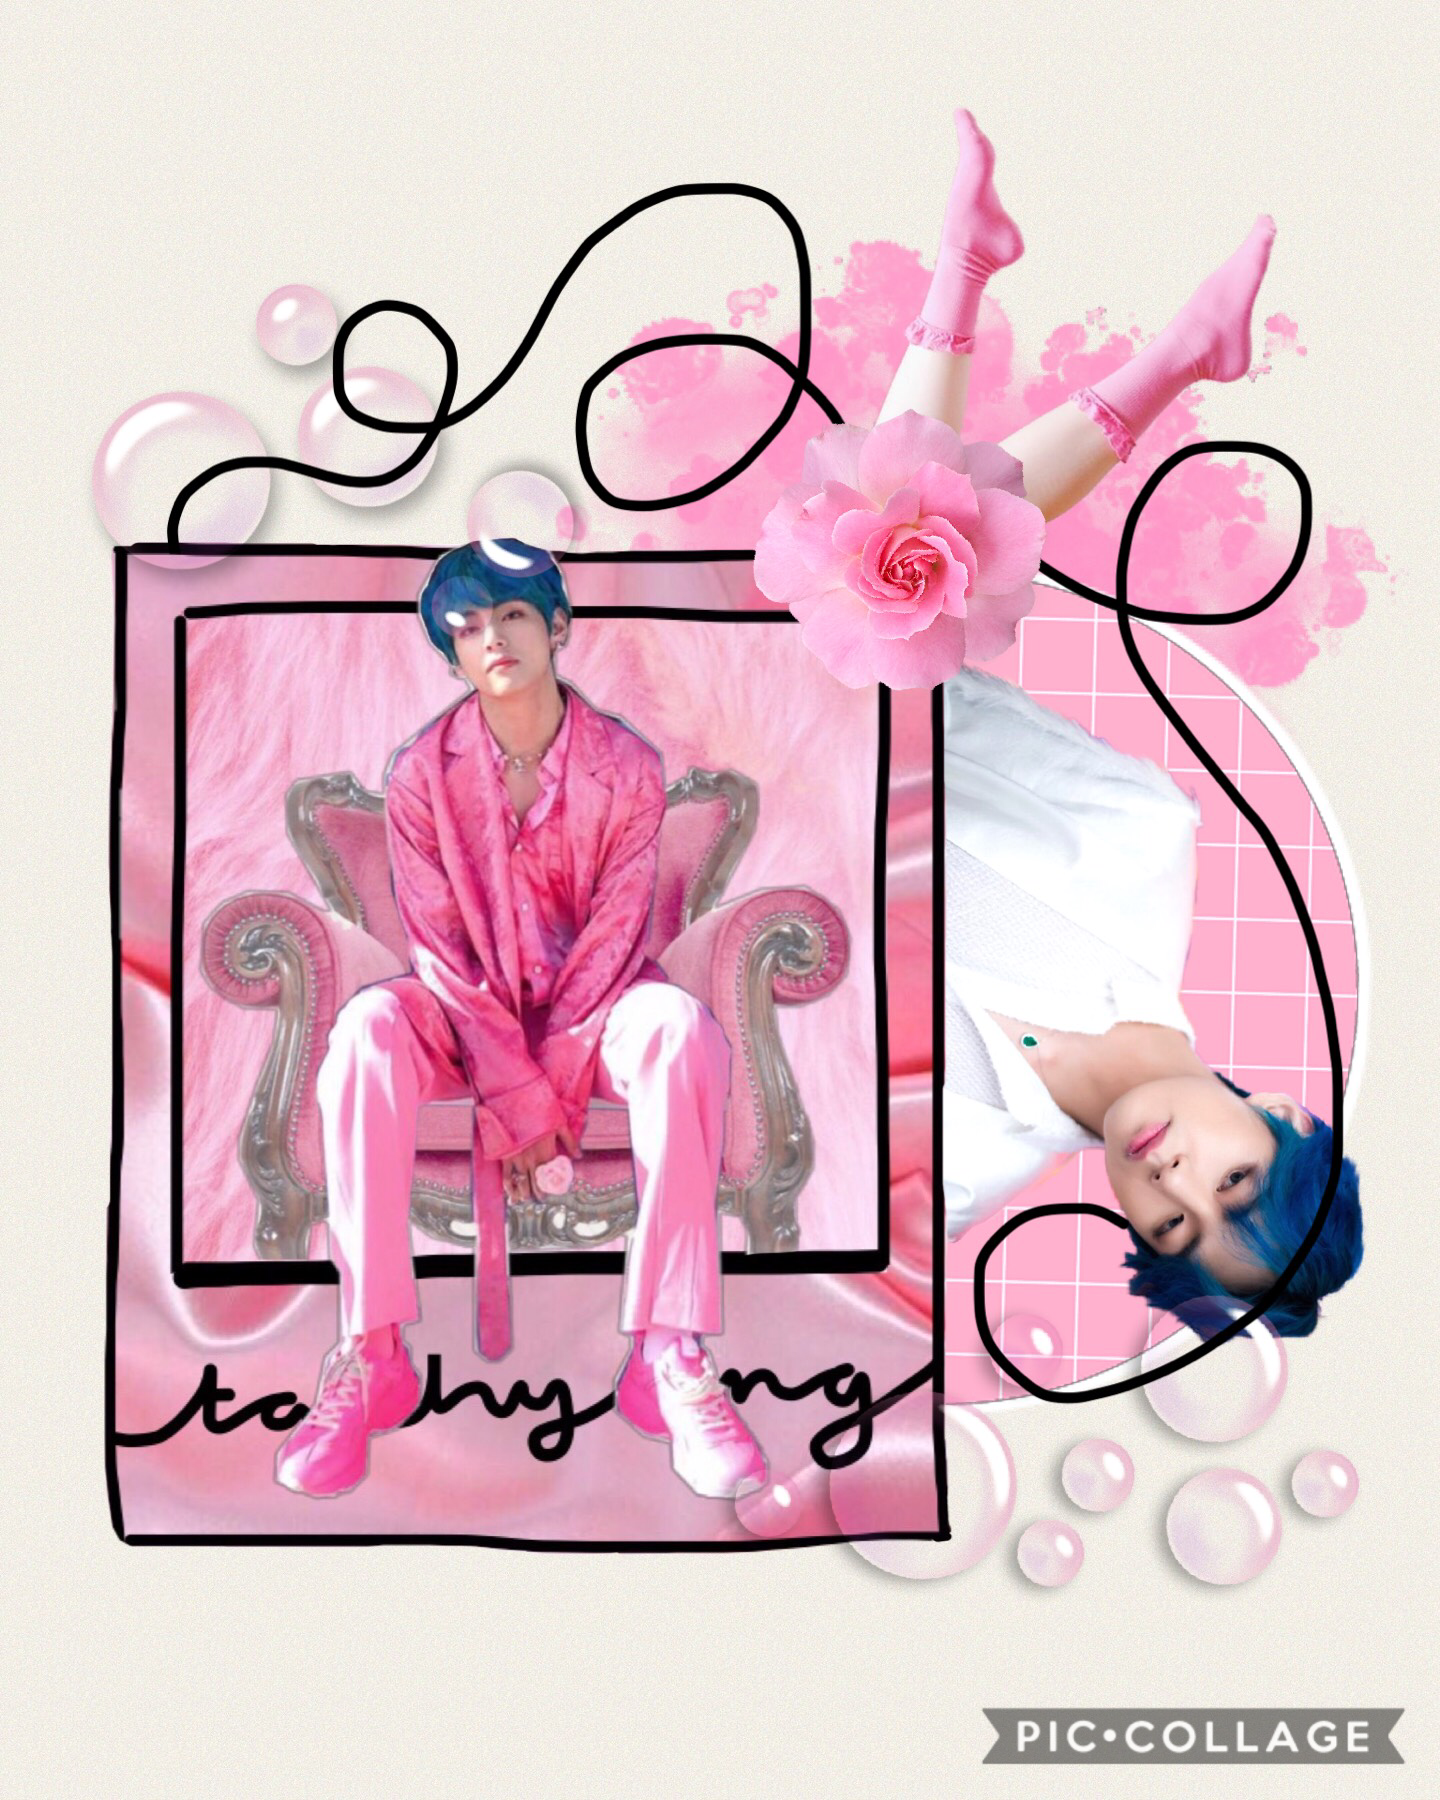 Heellooooo (tap)

Have another Tae-Tae edit (do not question the random pink socked legs)

👇🏻 Any music recommendations? 👇🏻